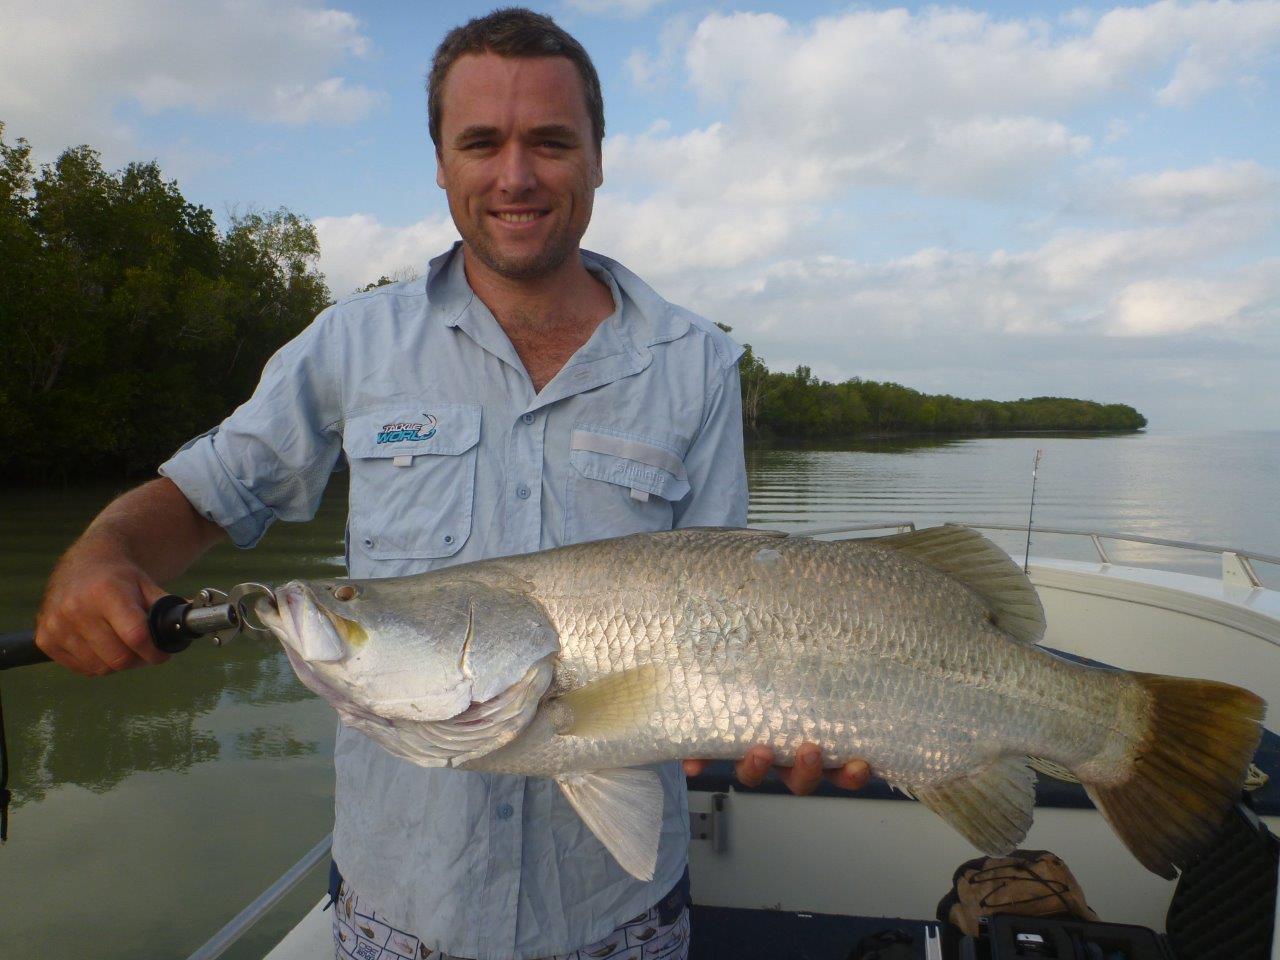 Our Top 5 lures for fishing on the Cobourg Peninsula. Tuna, Mangrove Jack,  Mackerel, Jewfish, Golden Snapper, Giant Trevally, Coral Trout, Barramundi.